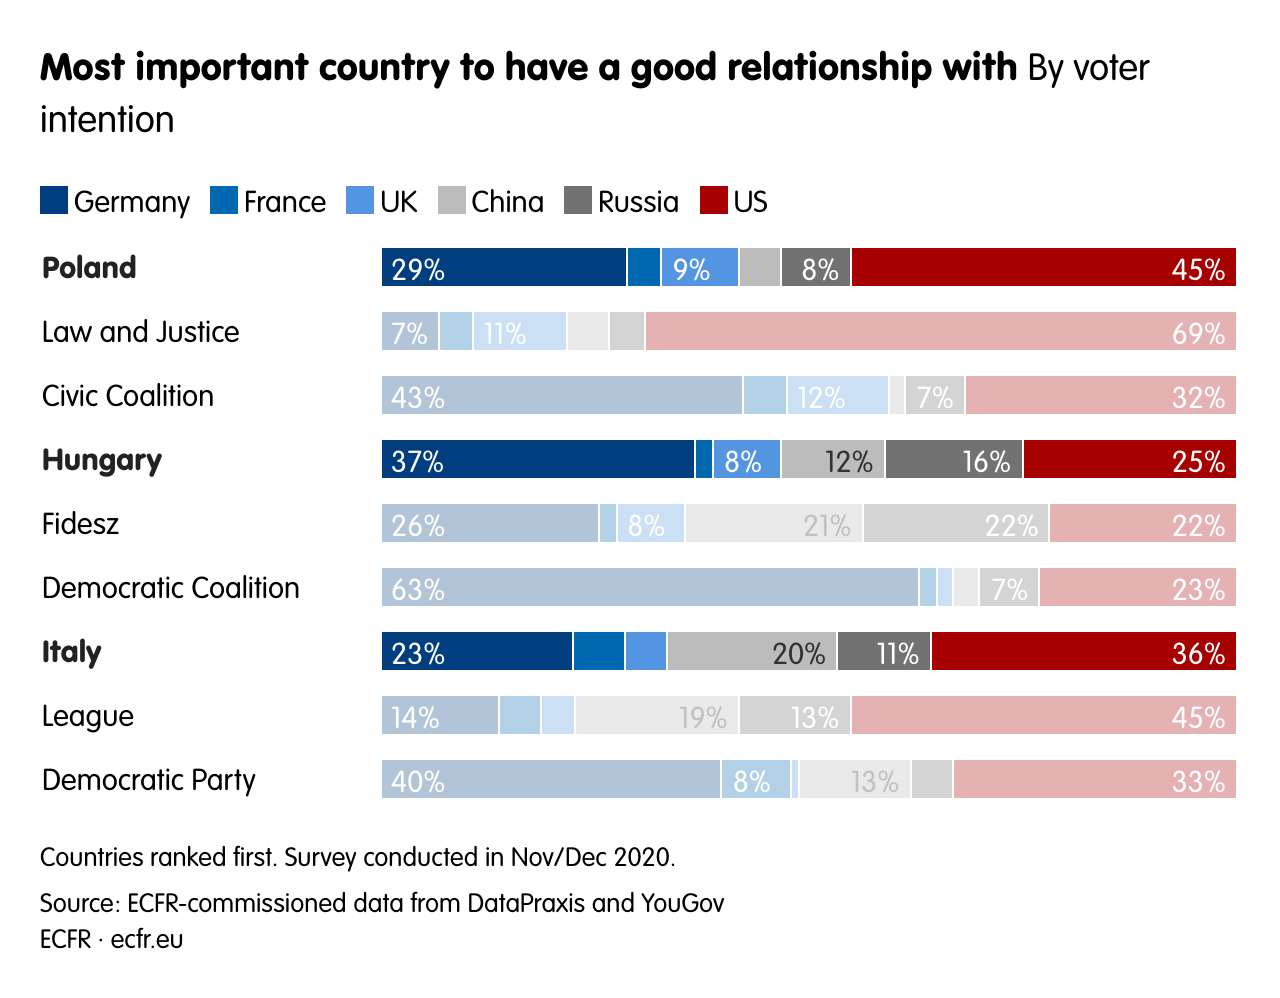 Most important country to have a good relationship with